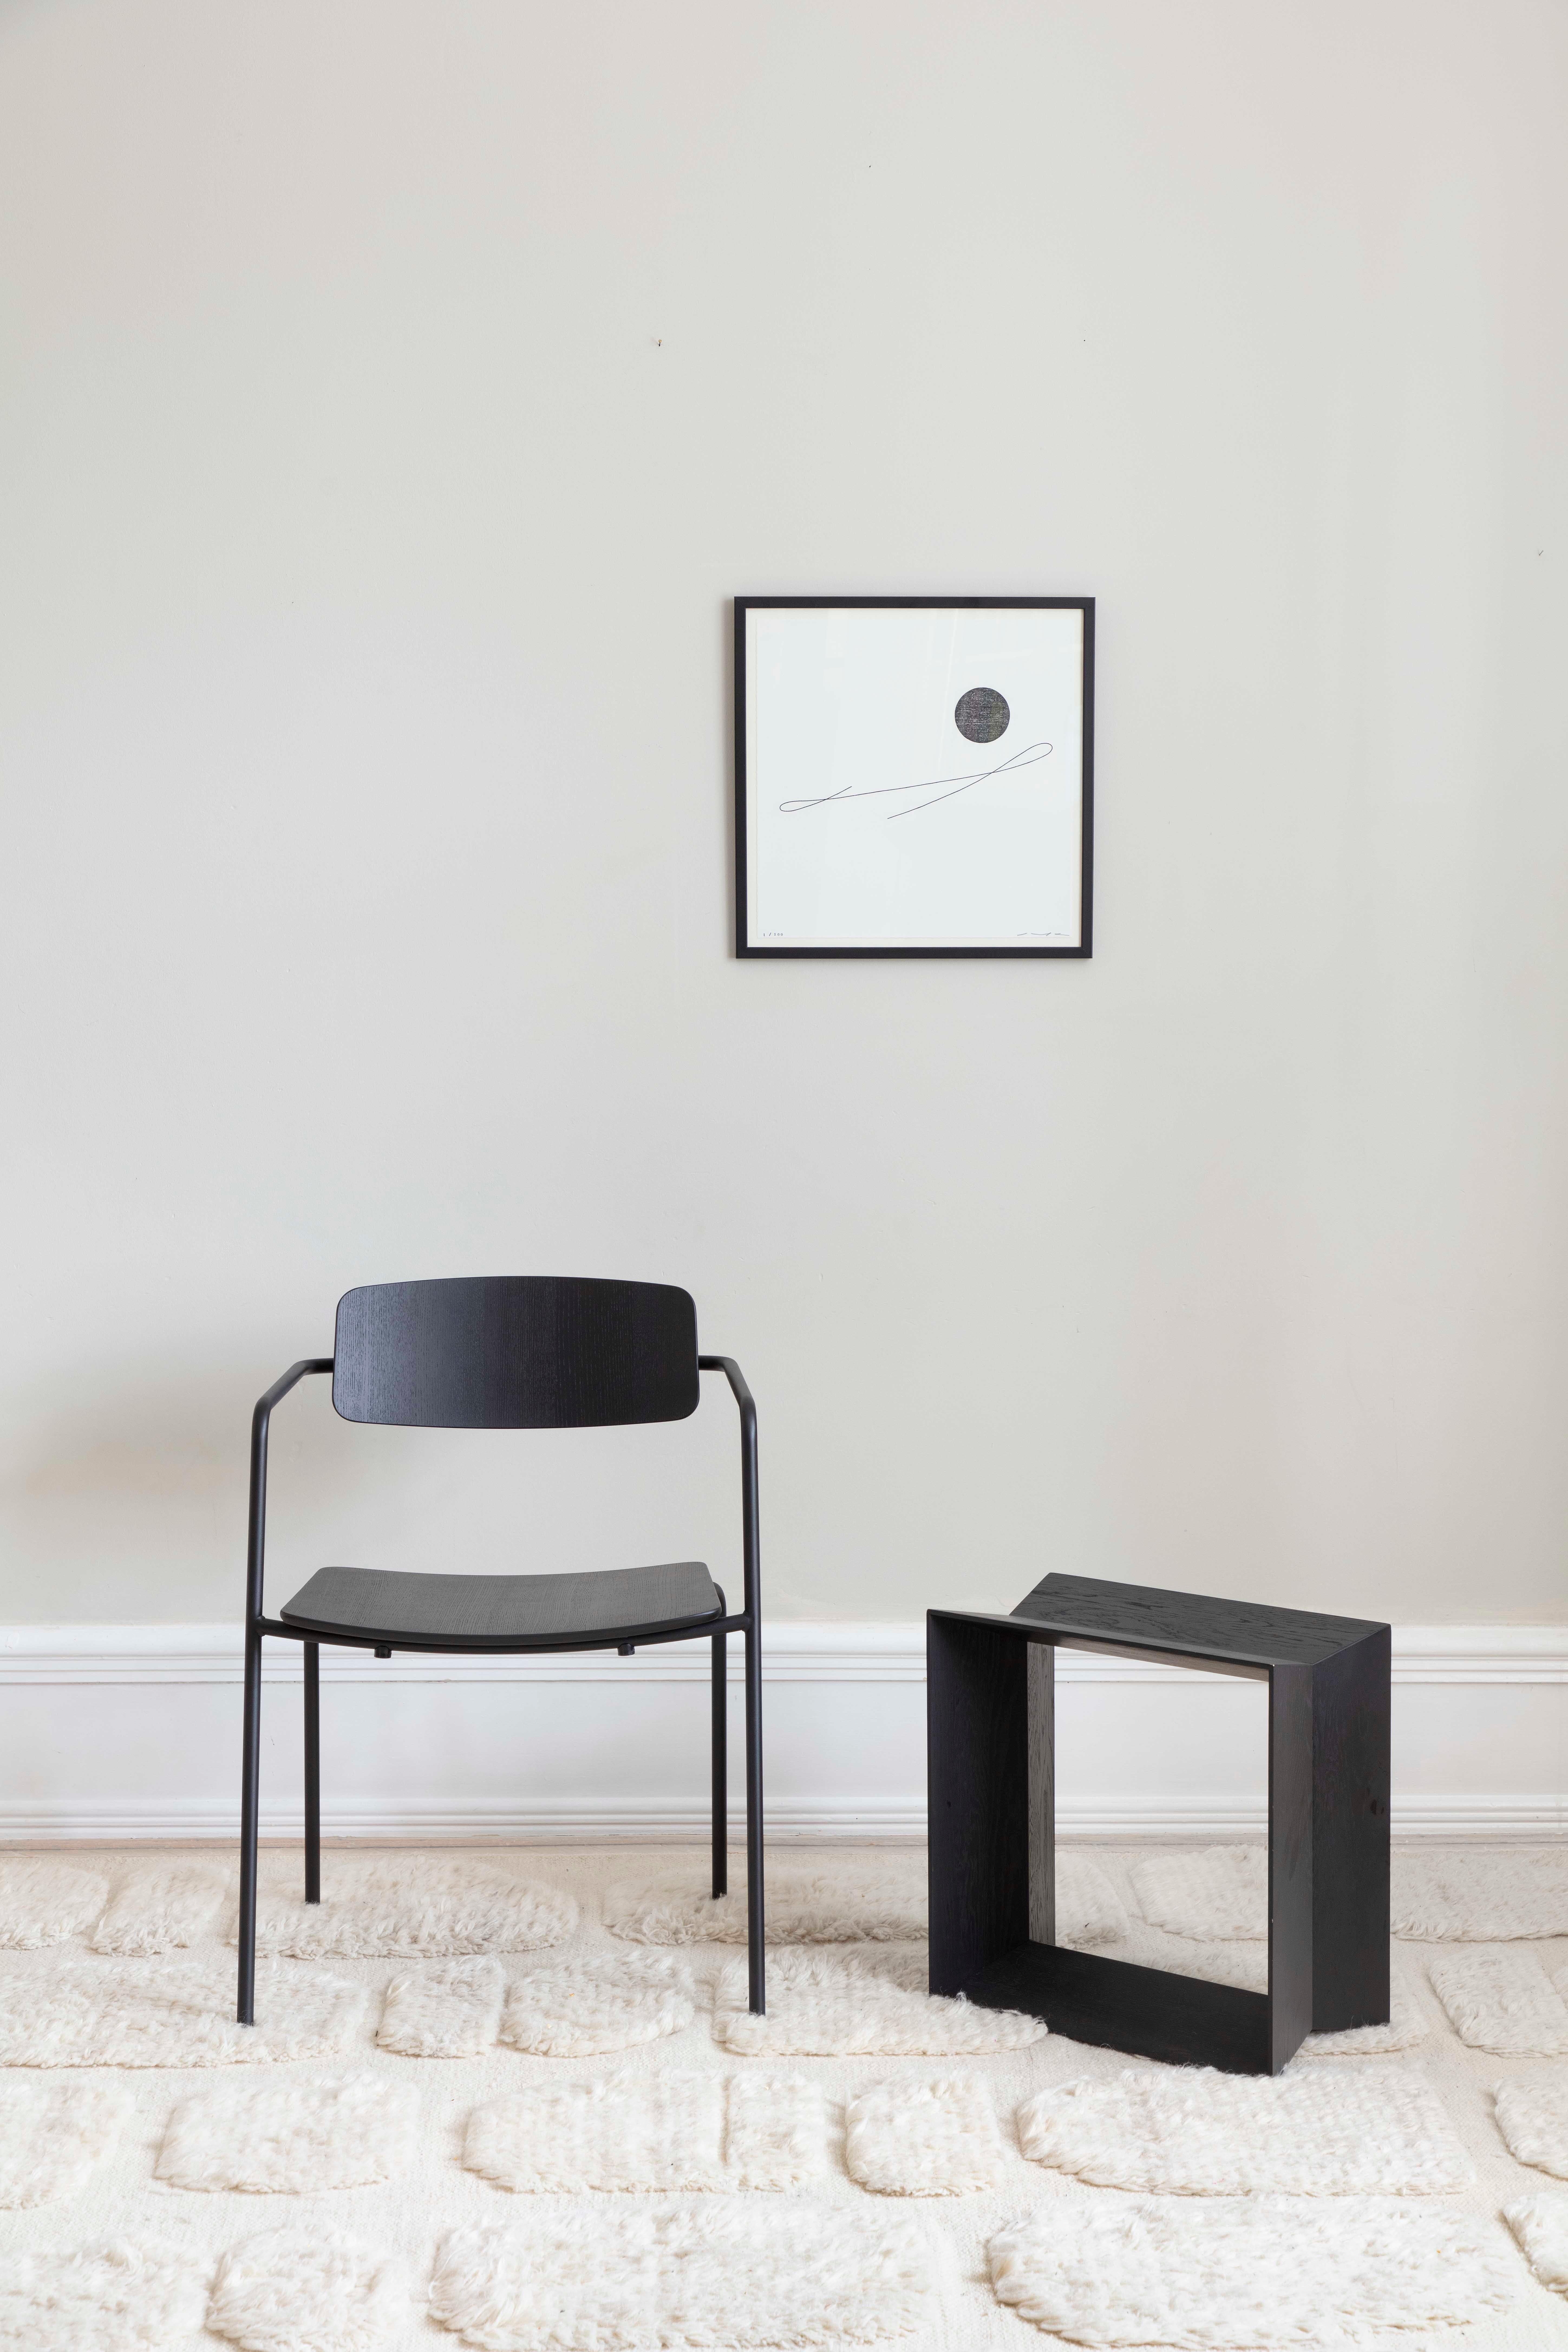 The REFLEX stool is a sculptural approach to comfortable seating. The stool consists of 1 shape multiplied 8 times. The result is a simple stool in a simple construction.

REFLEX is suitable for many settings at home whether in the hallway, living